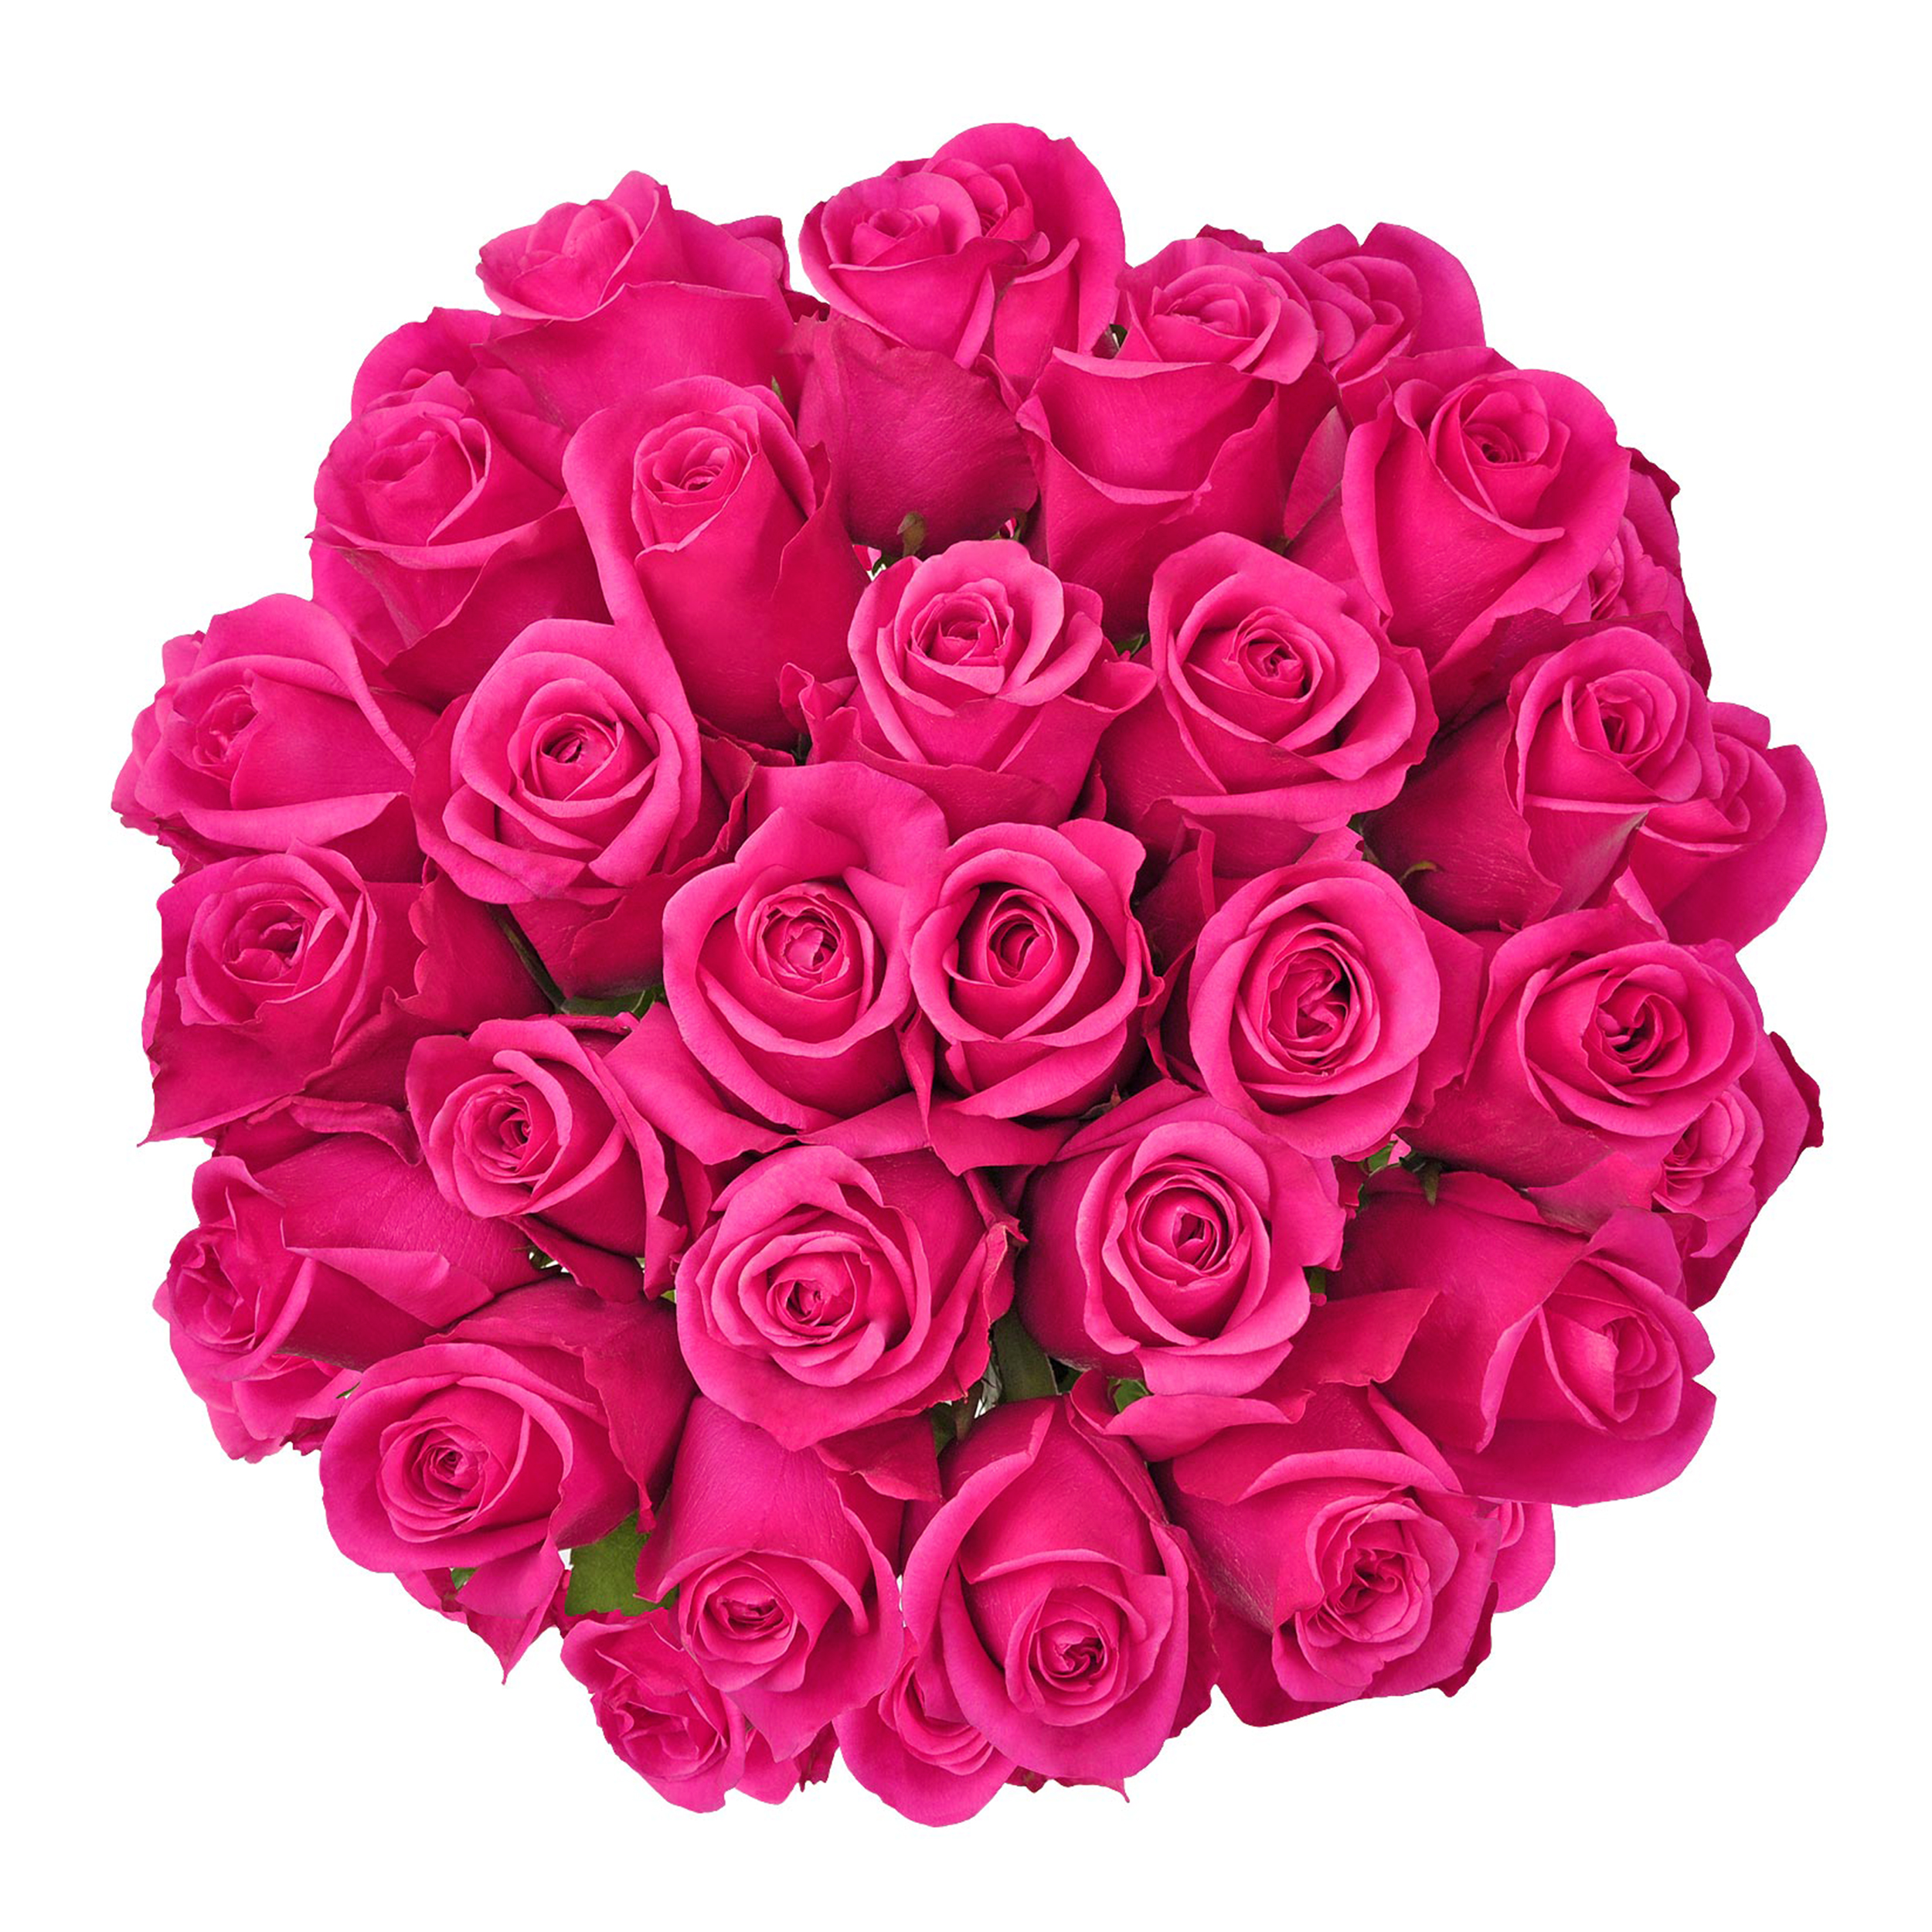 Hot Pink Roses - Farm Direct Fresh Cut Flowers - 50 Stems - Roses -by Bloomingmore - image 4 of 7